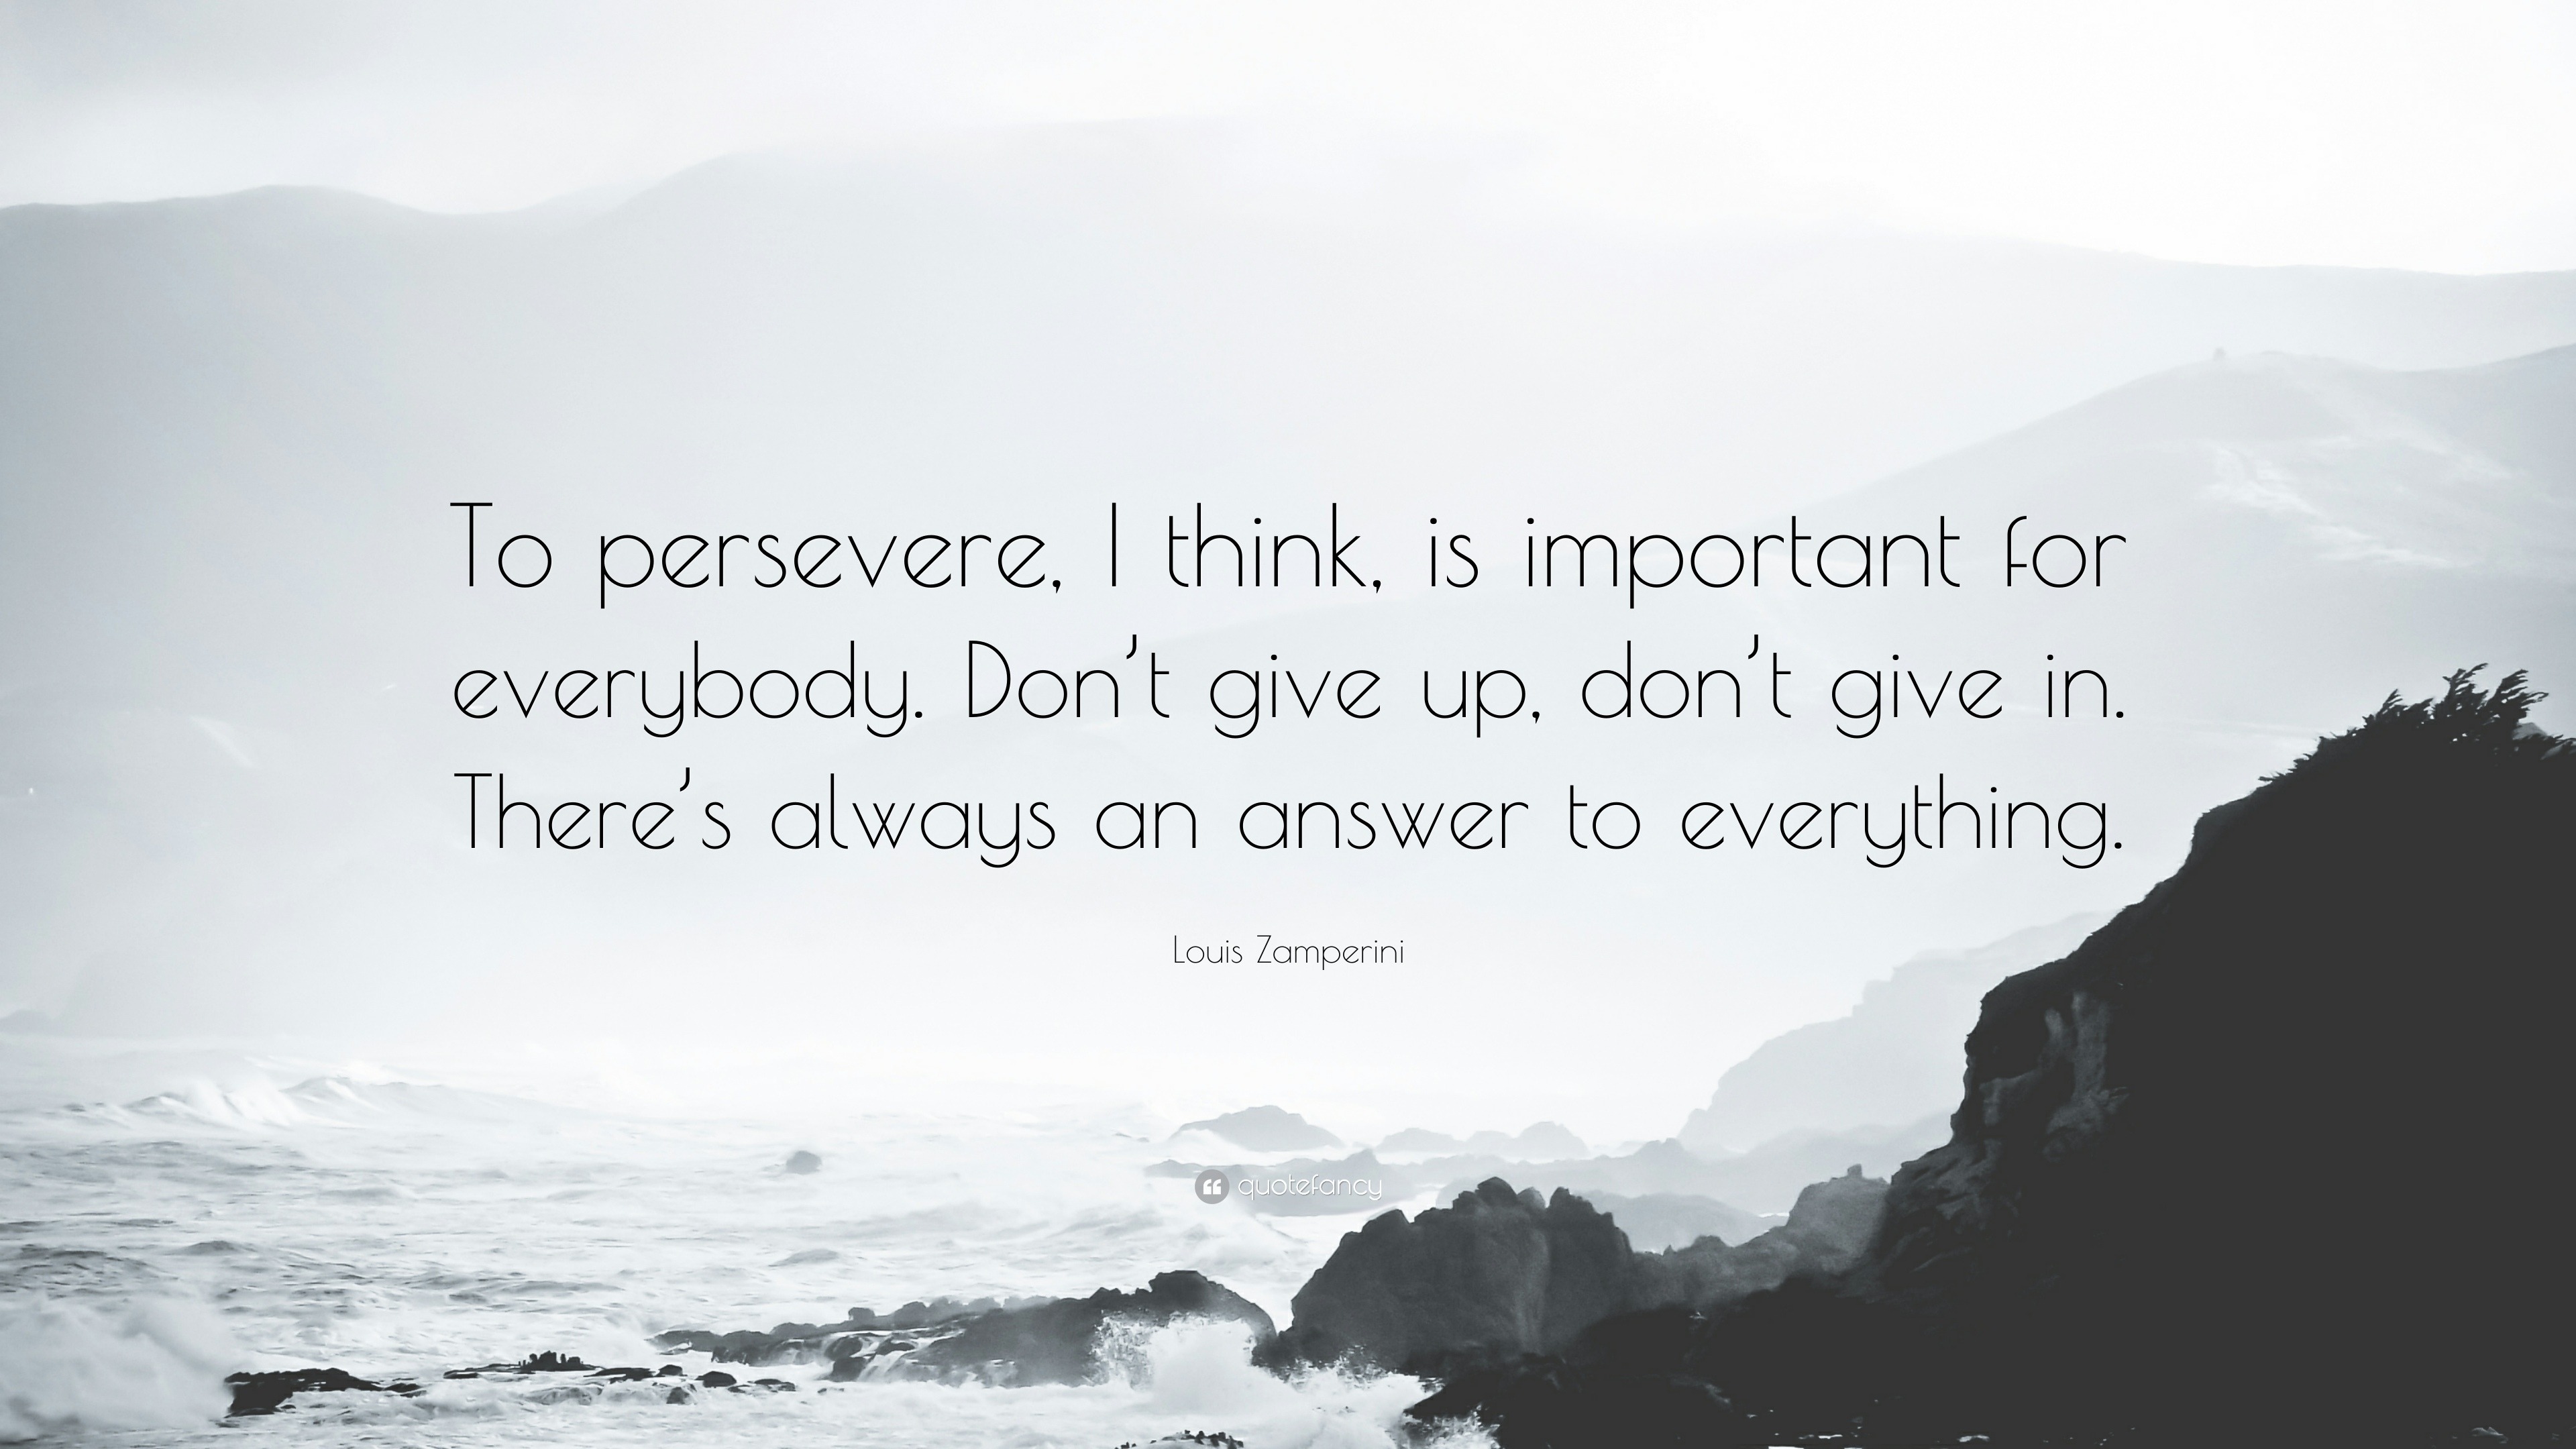 why is it important to persevere